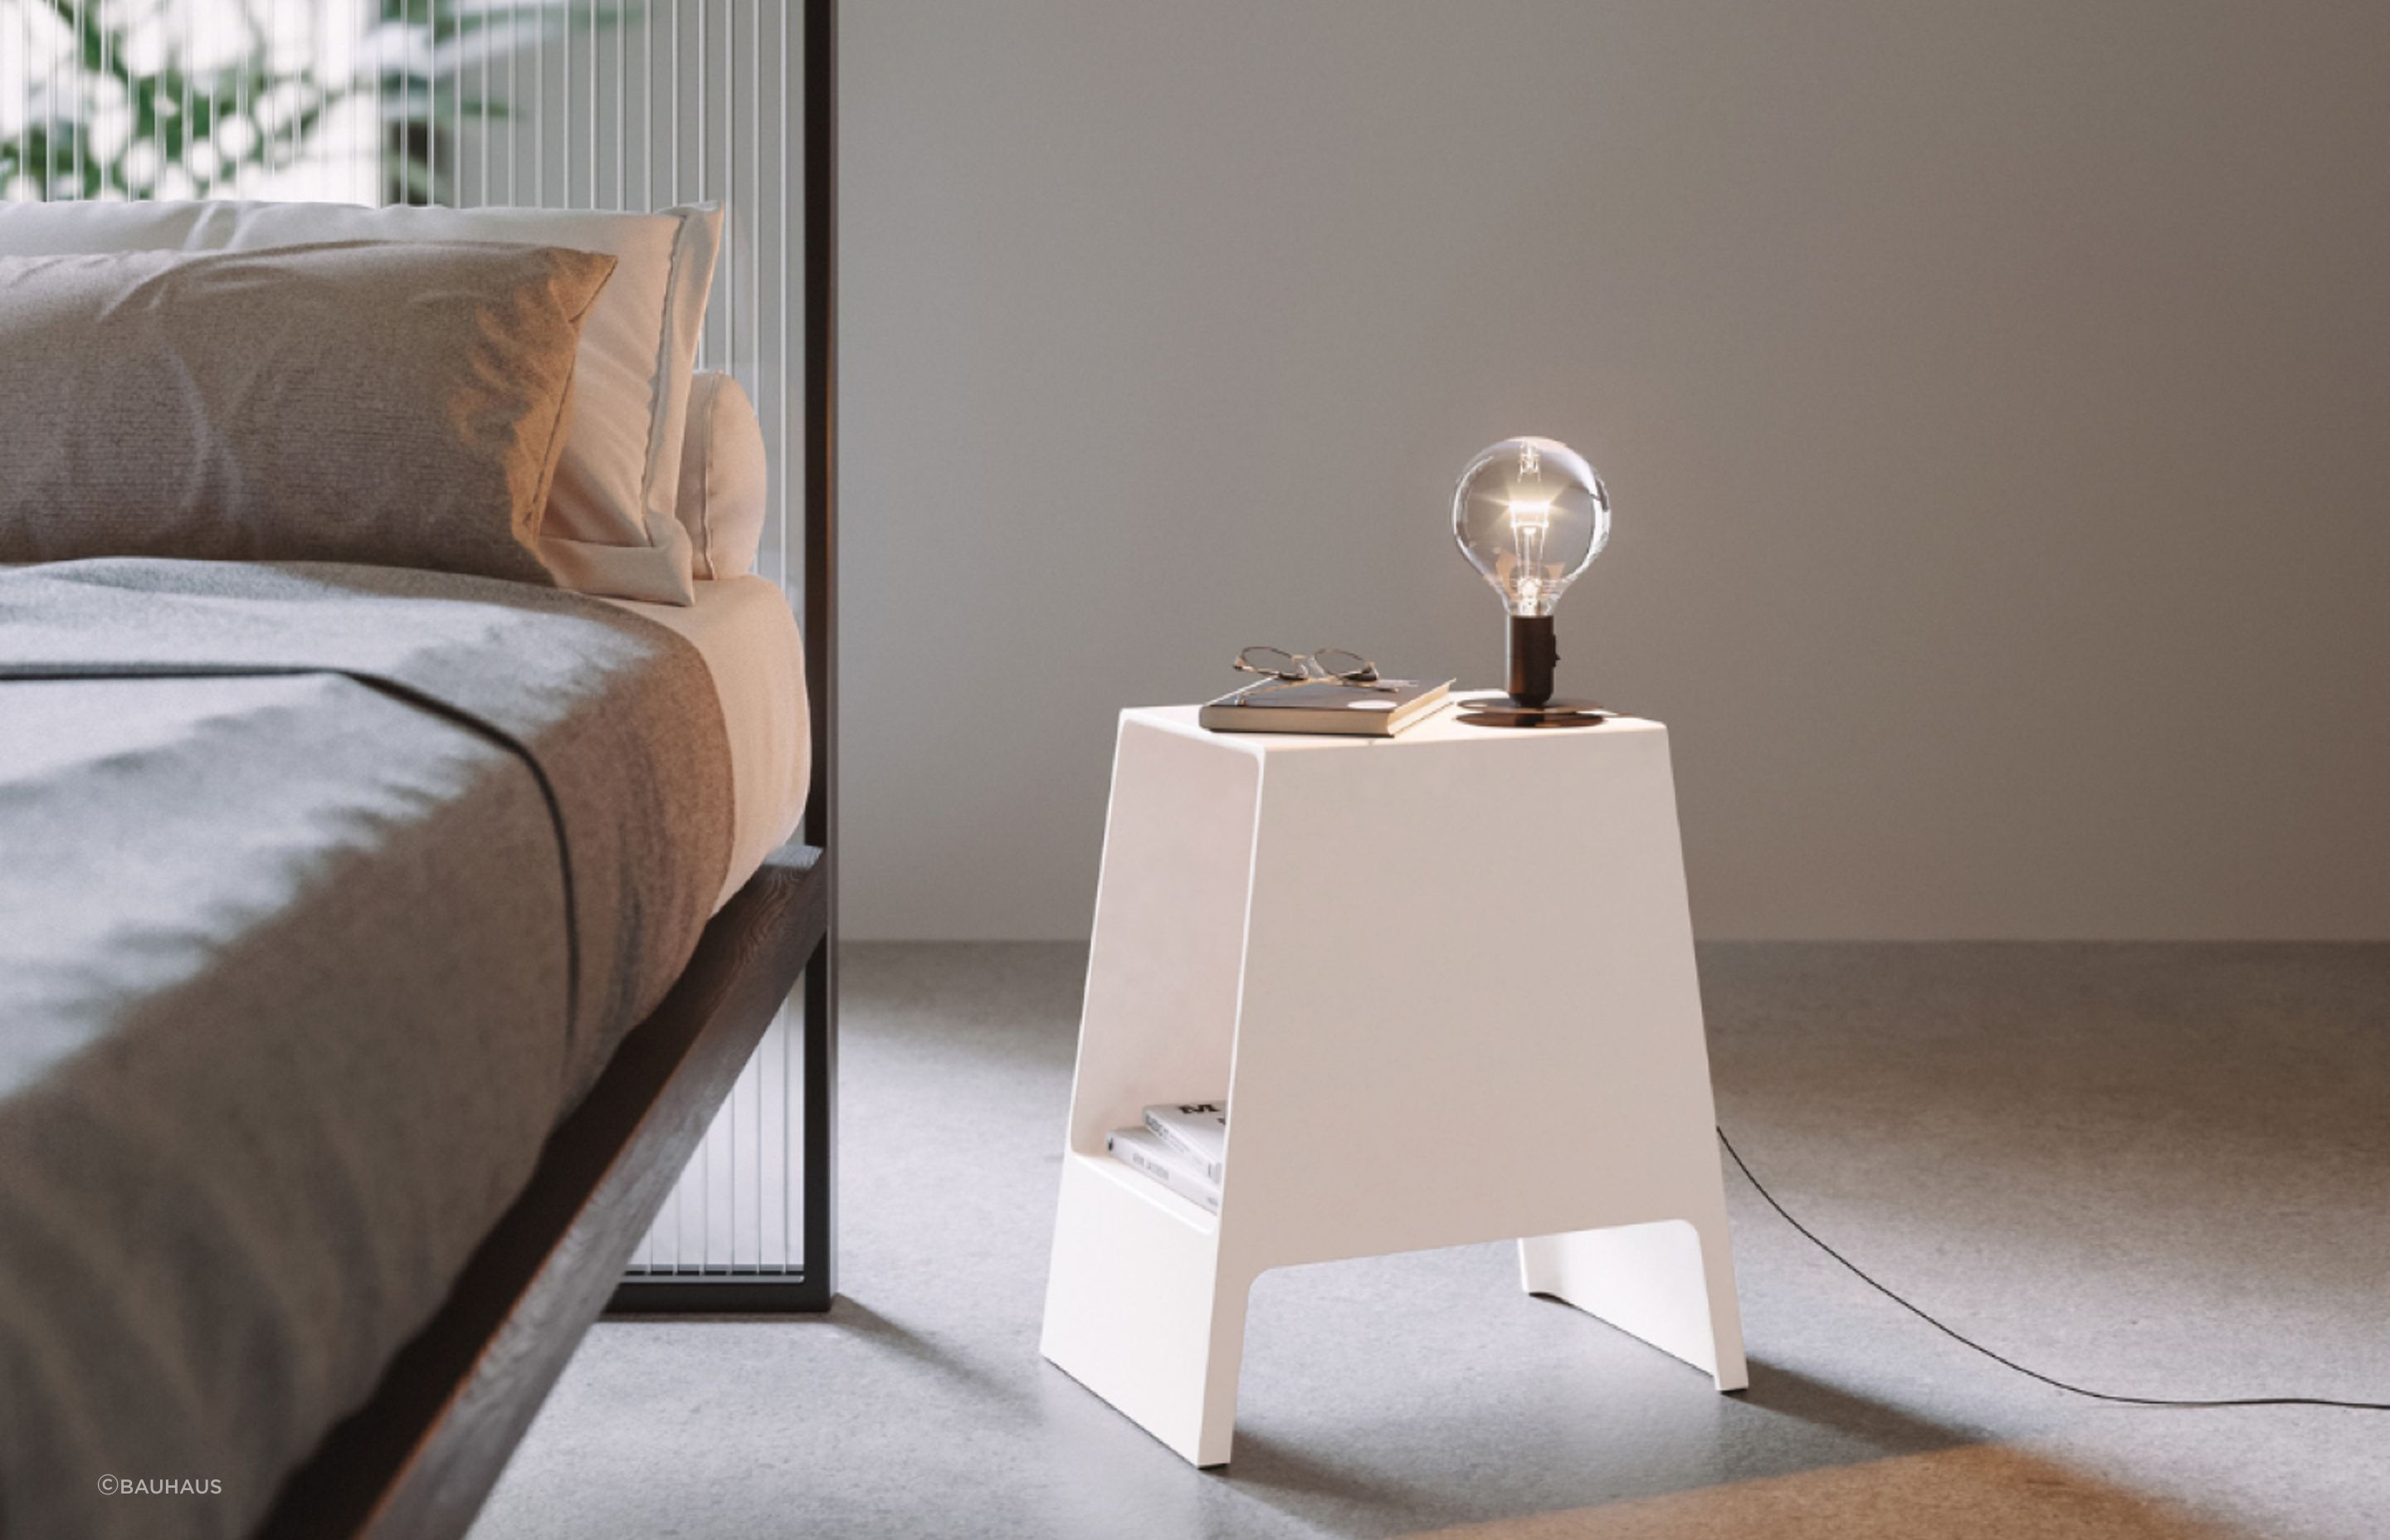 Multi-functional options are incredibly handy, like this Tomo Side Table by Toou which can act as a bedside table, side table and a stool.